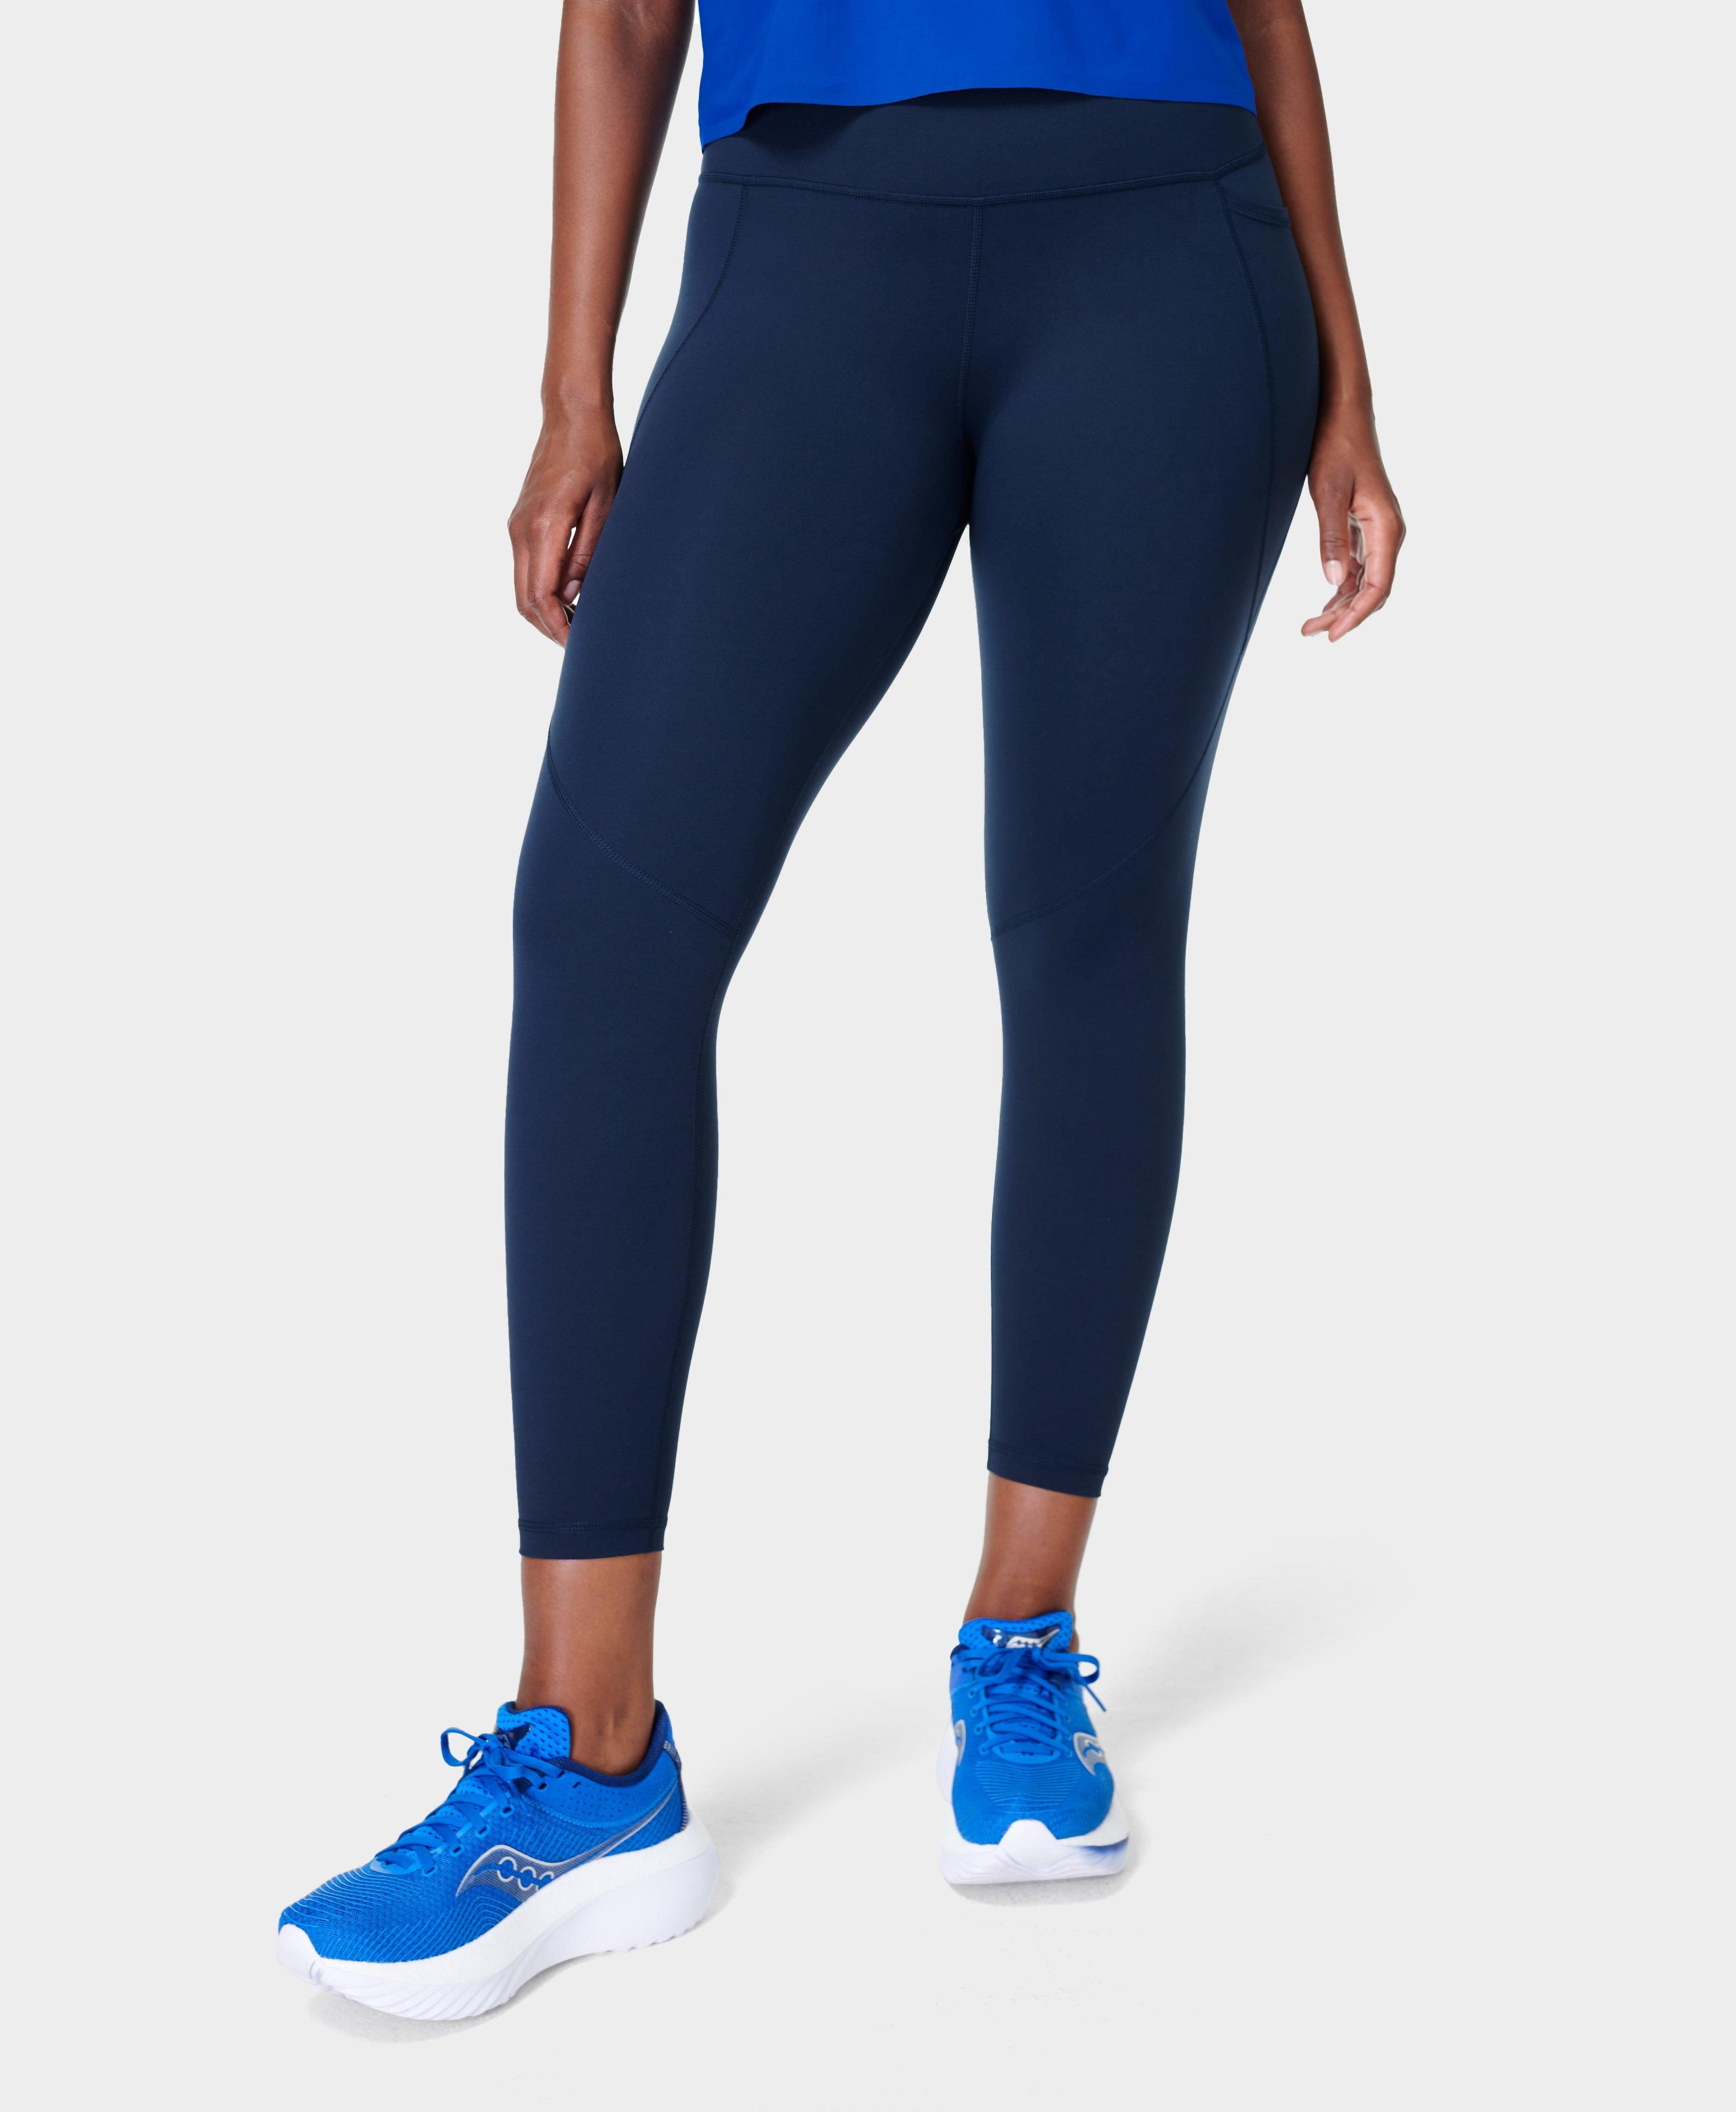 Sweaty Betty power leggings review beetle blue-7 - Agent Athletica